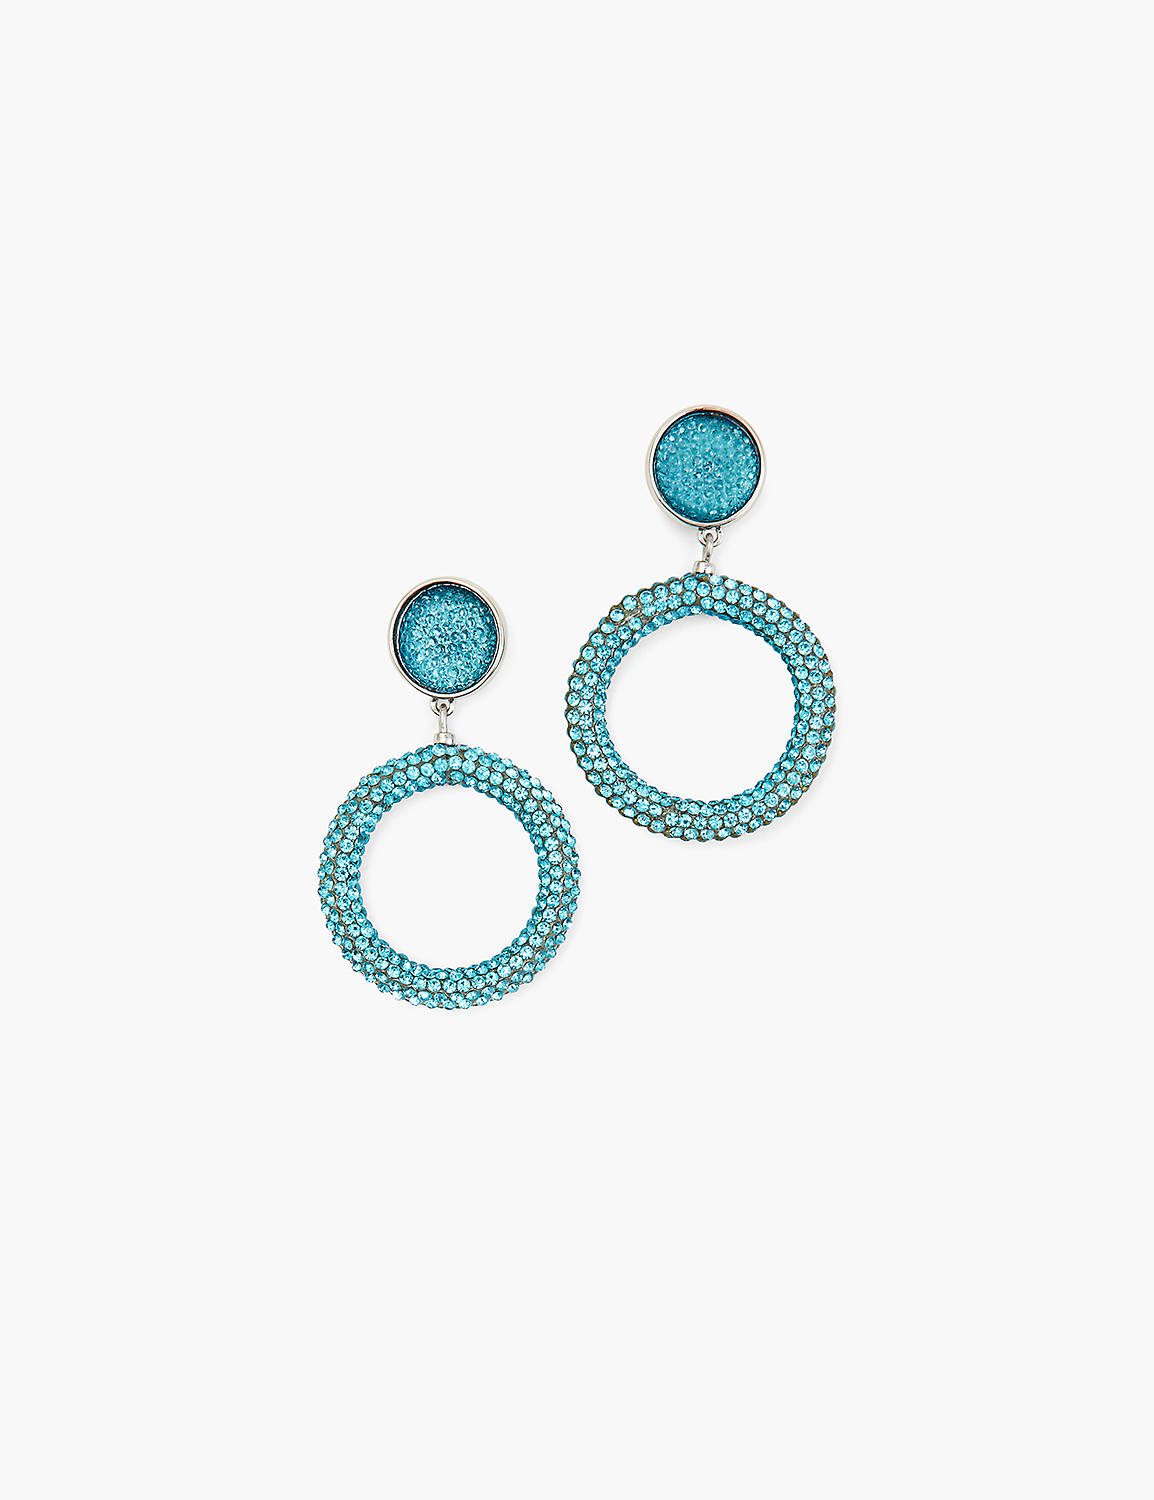 Blue Embellished Drop Earrings Product Image 1